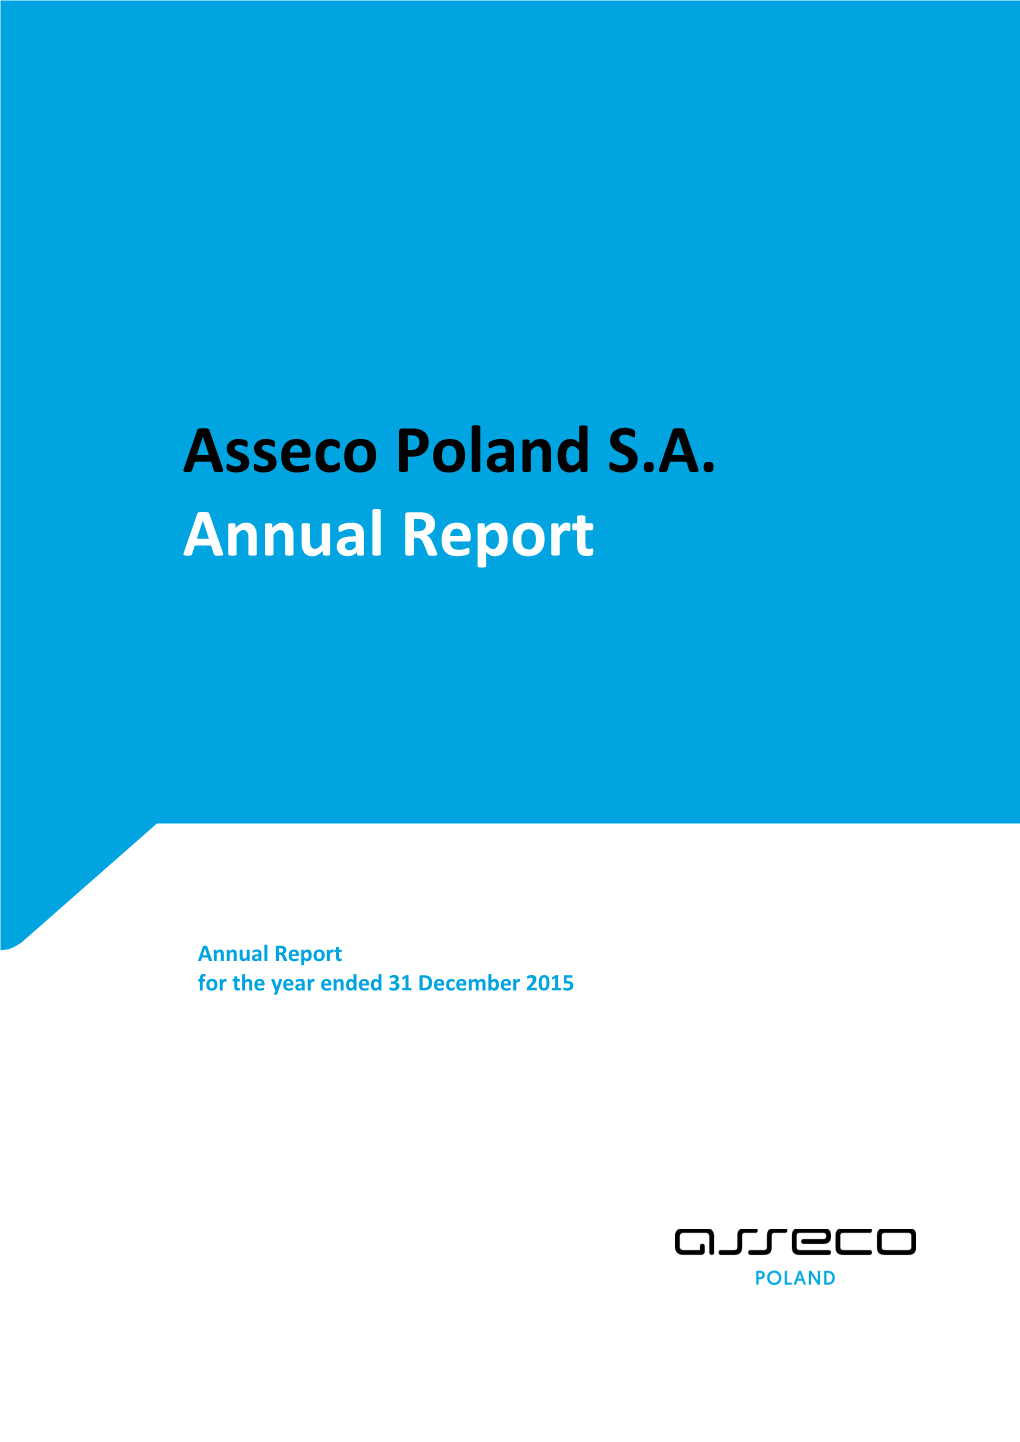 Asseco Poland S.A. Annual Report